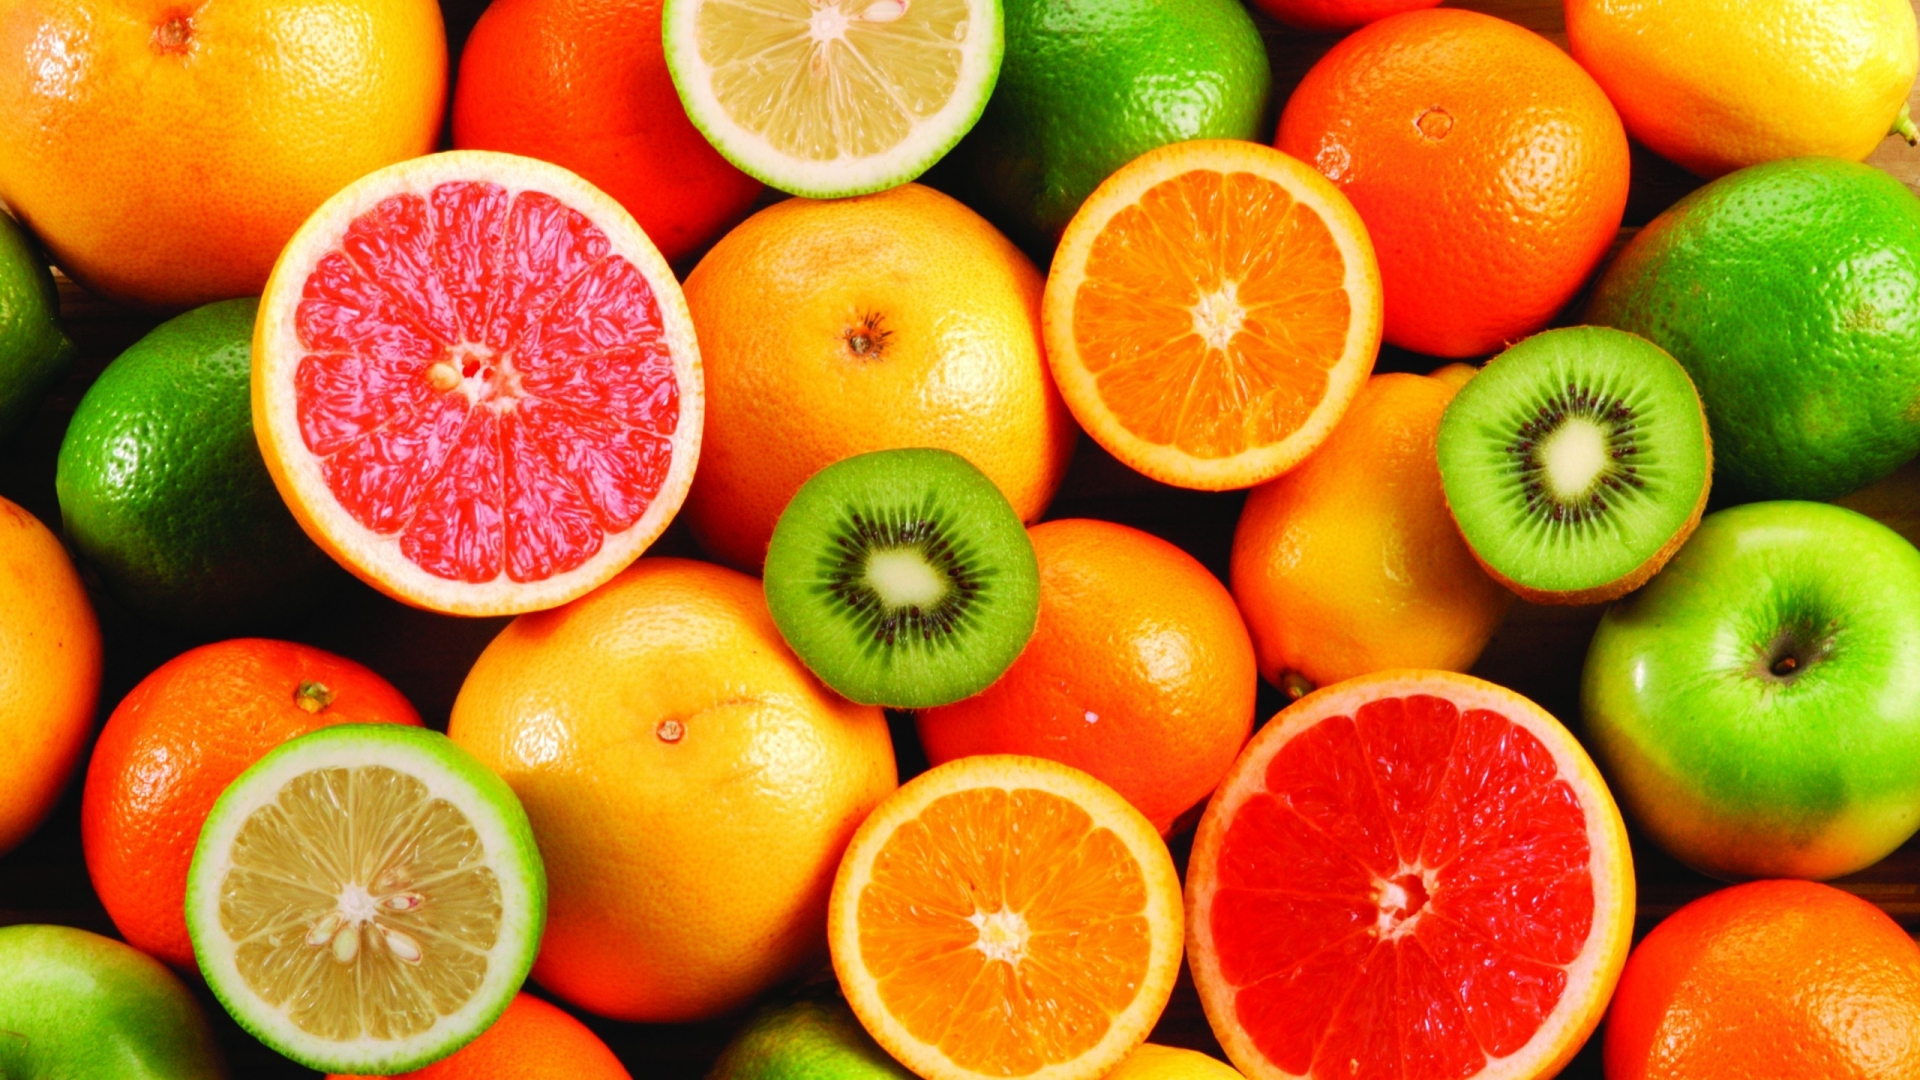 Healthy Citrus for 1920 x 1080 HDTV 1080p resolution